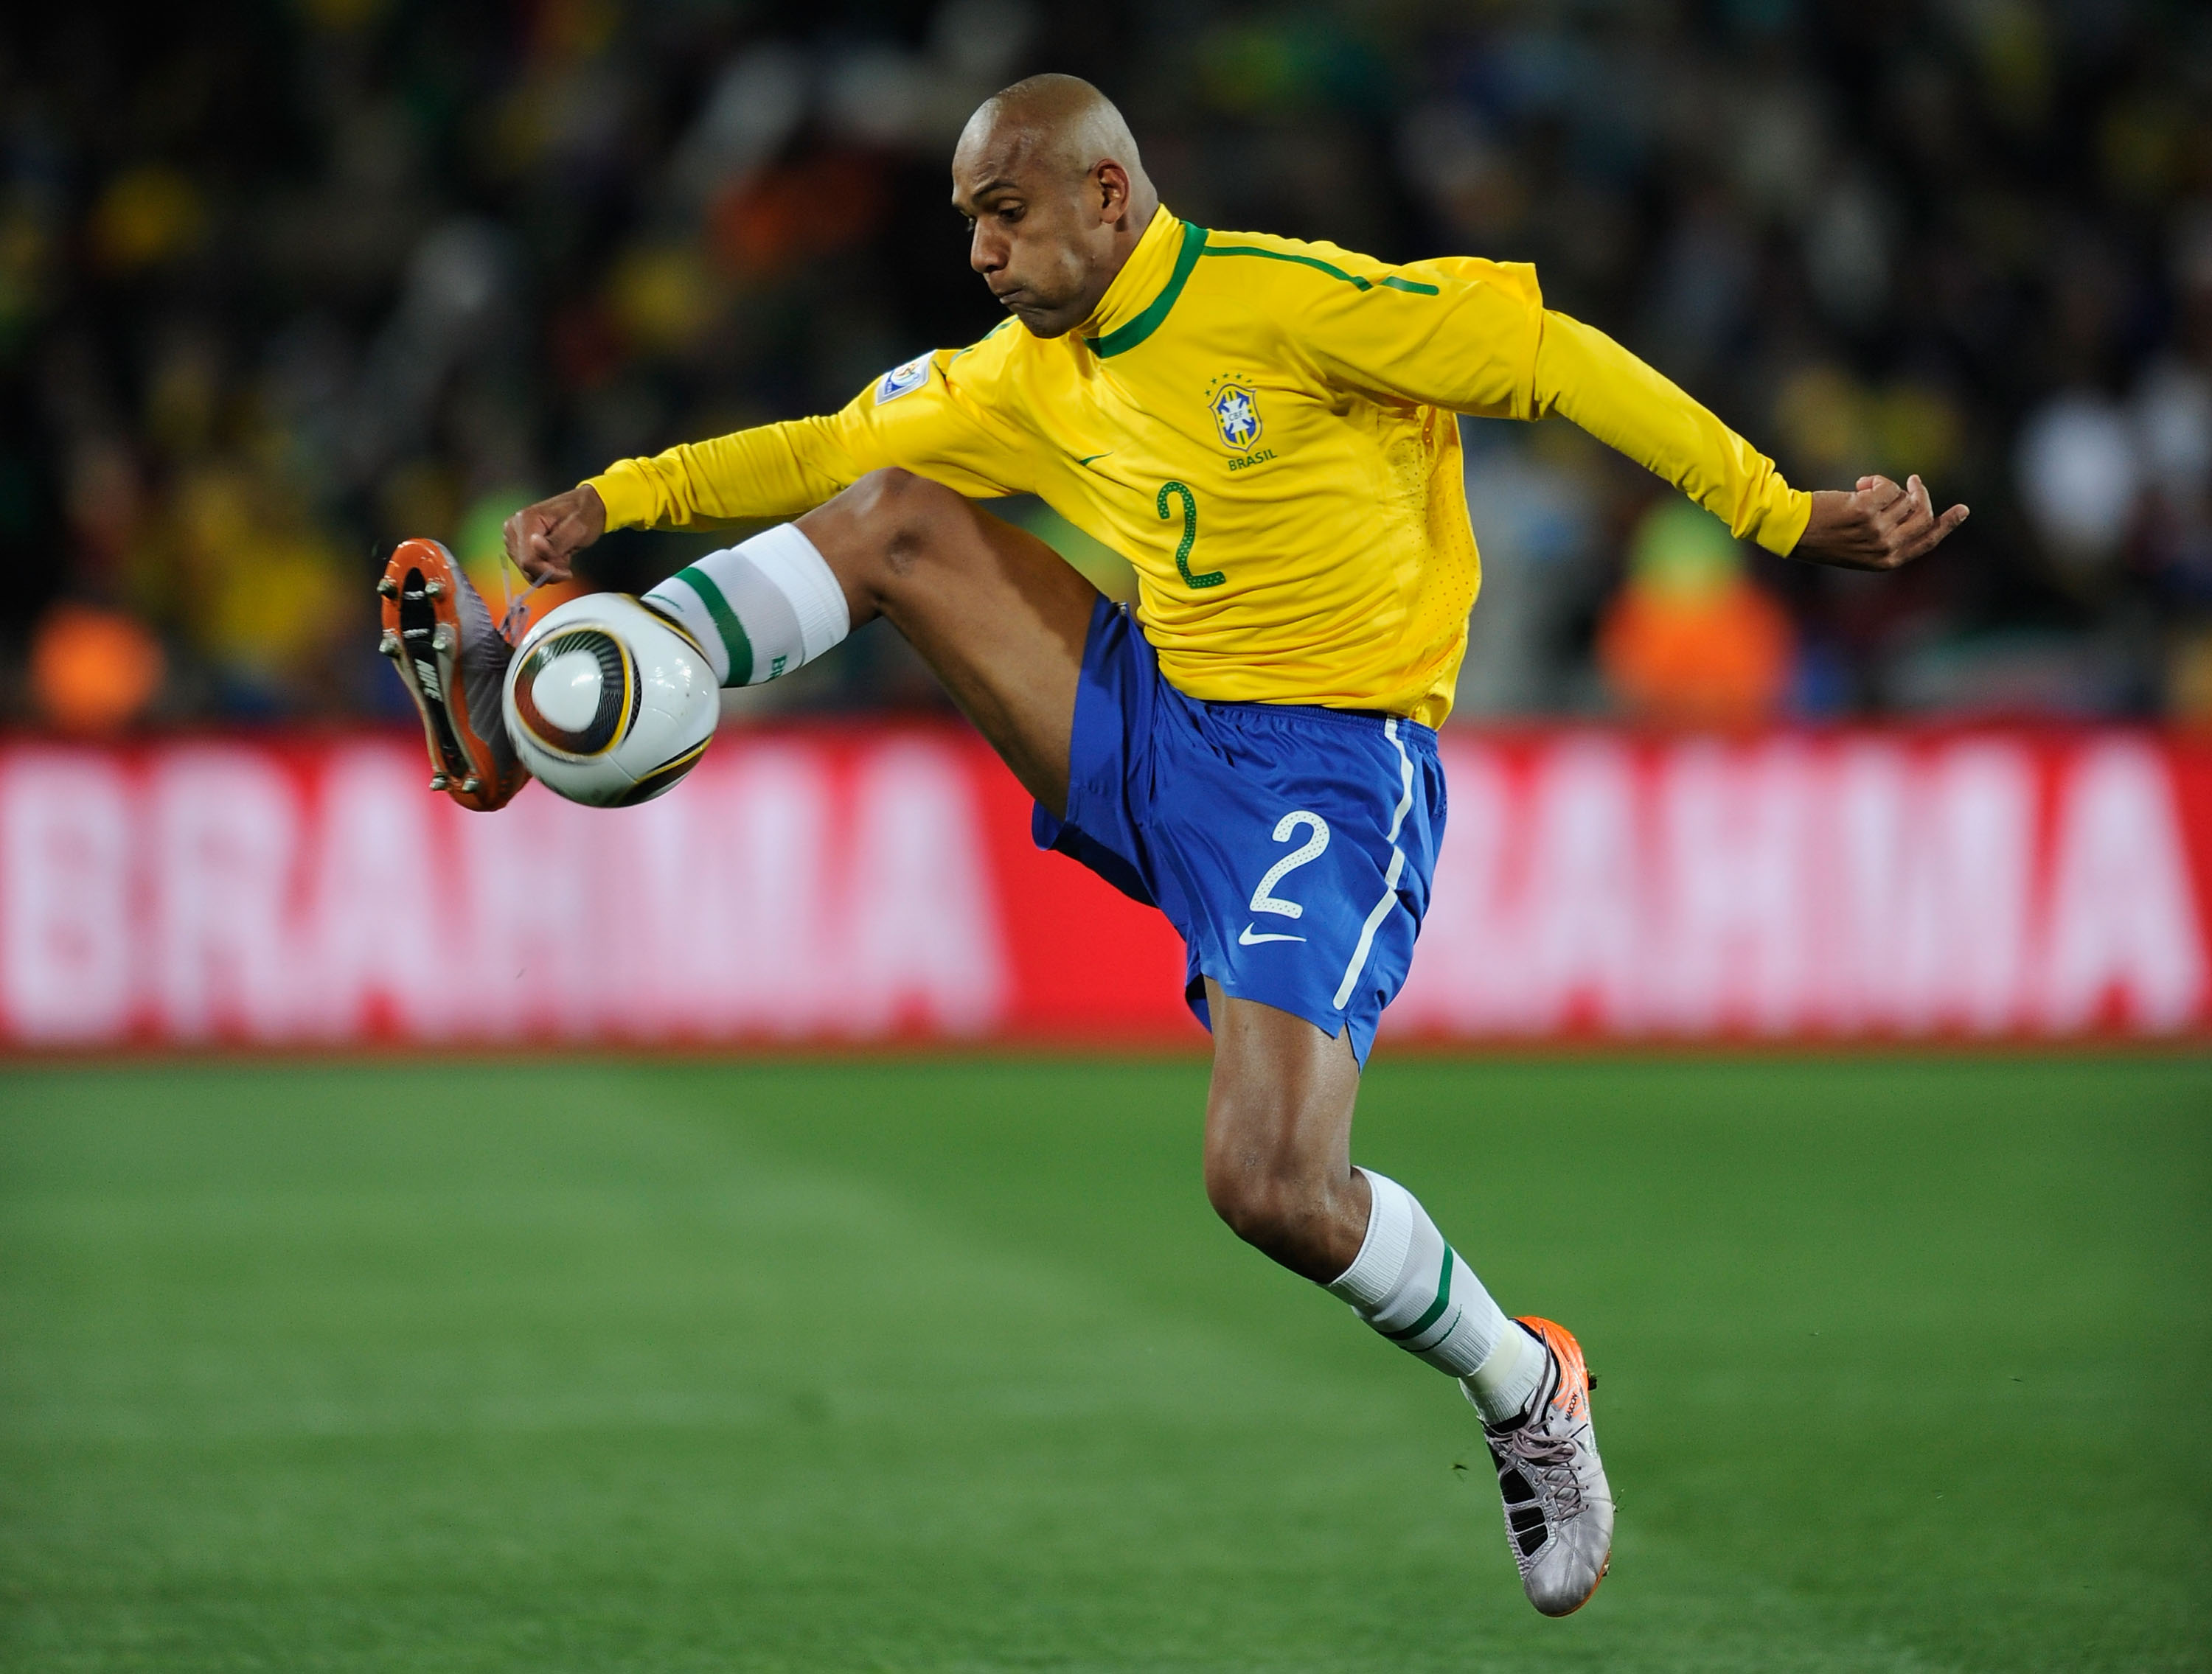 Maicon in action for Brazil against North Korea at the 2010 World Cup.